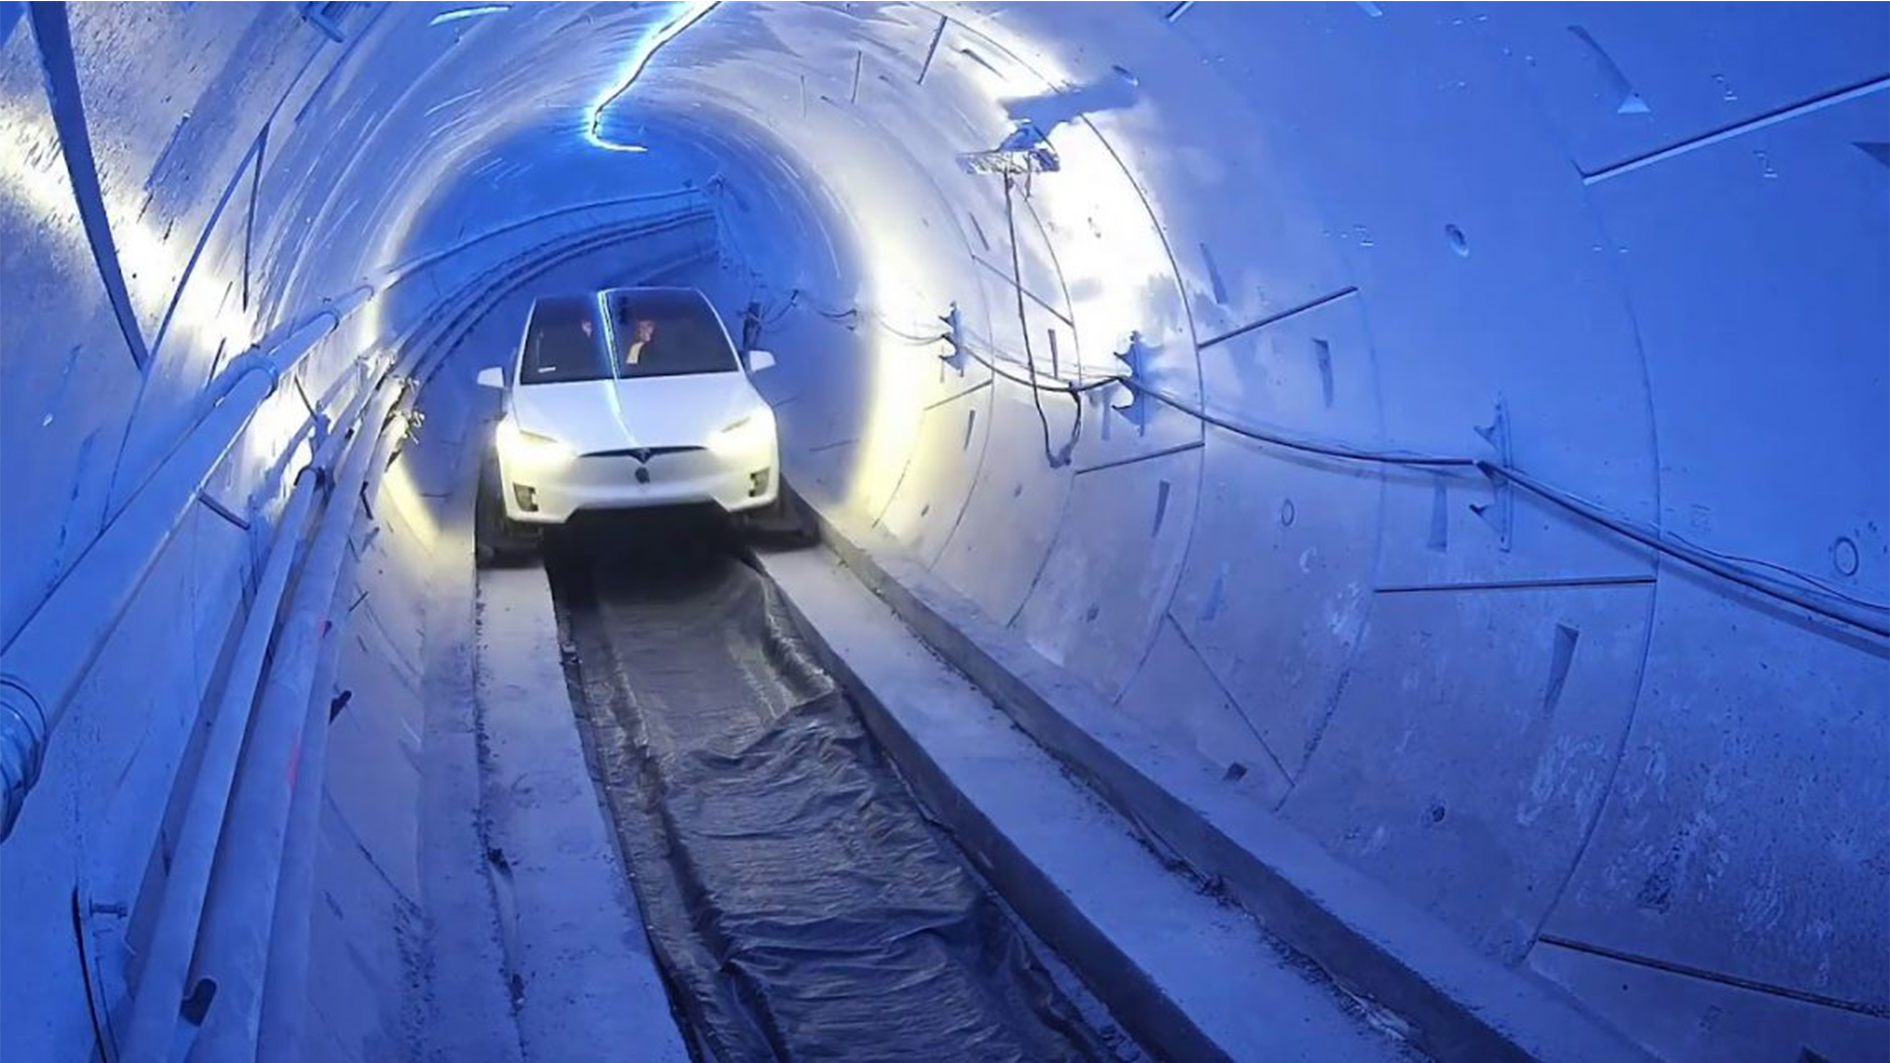 Elon Musk's company proposes new tunnel for transport in Tesla cars | Business